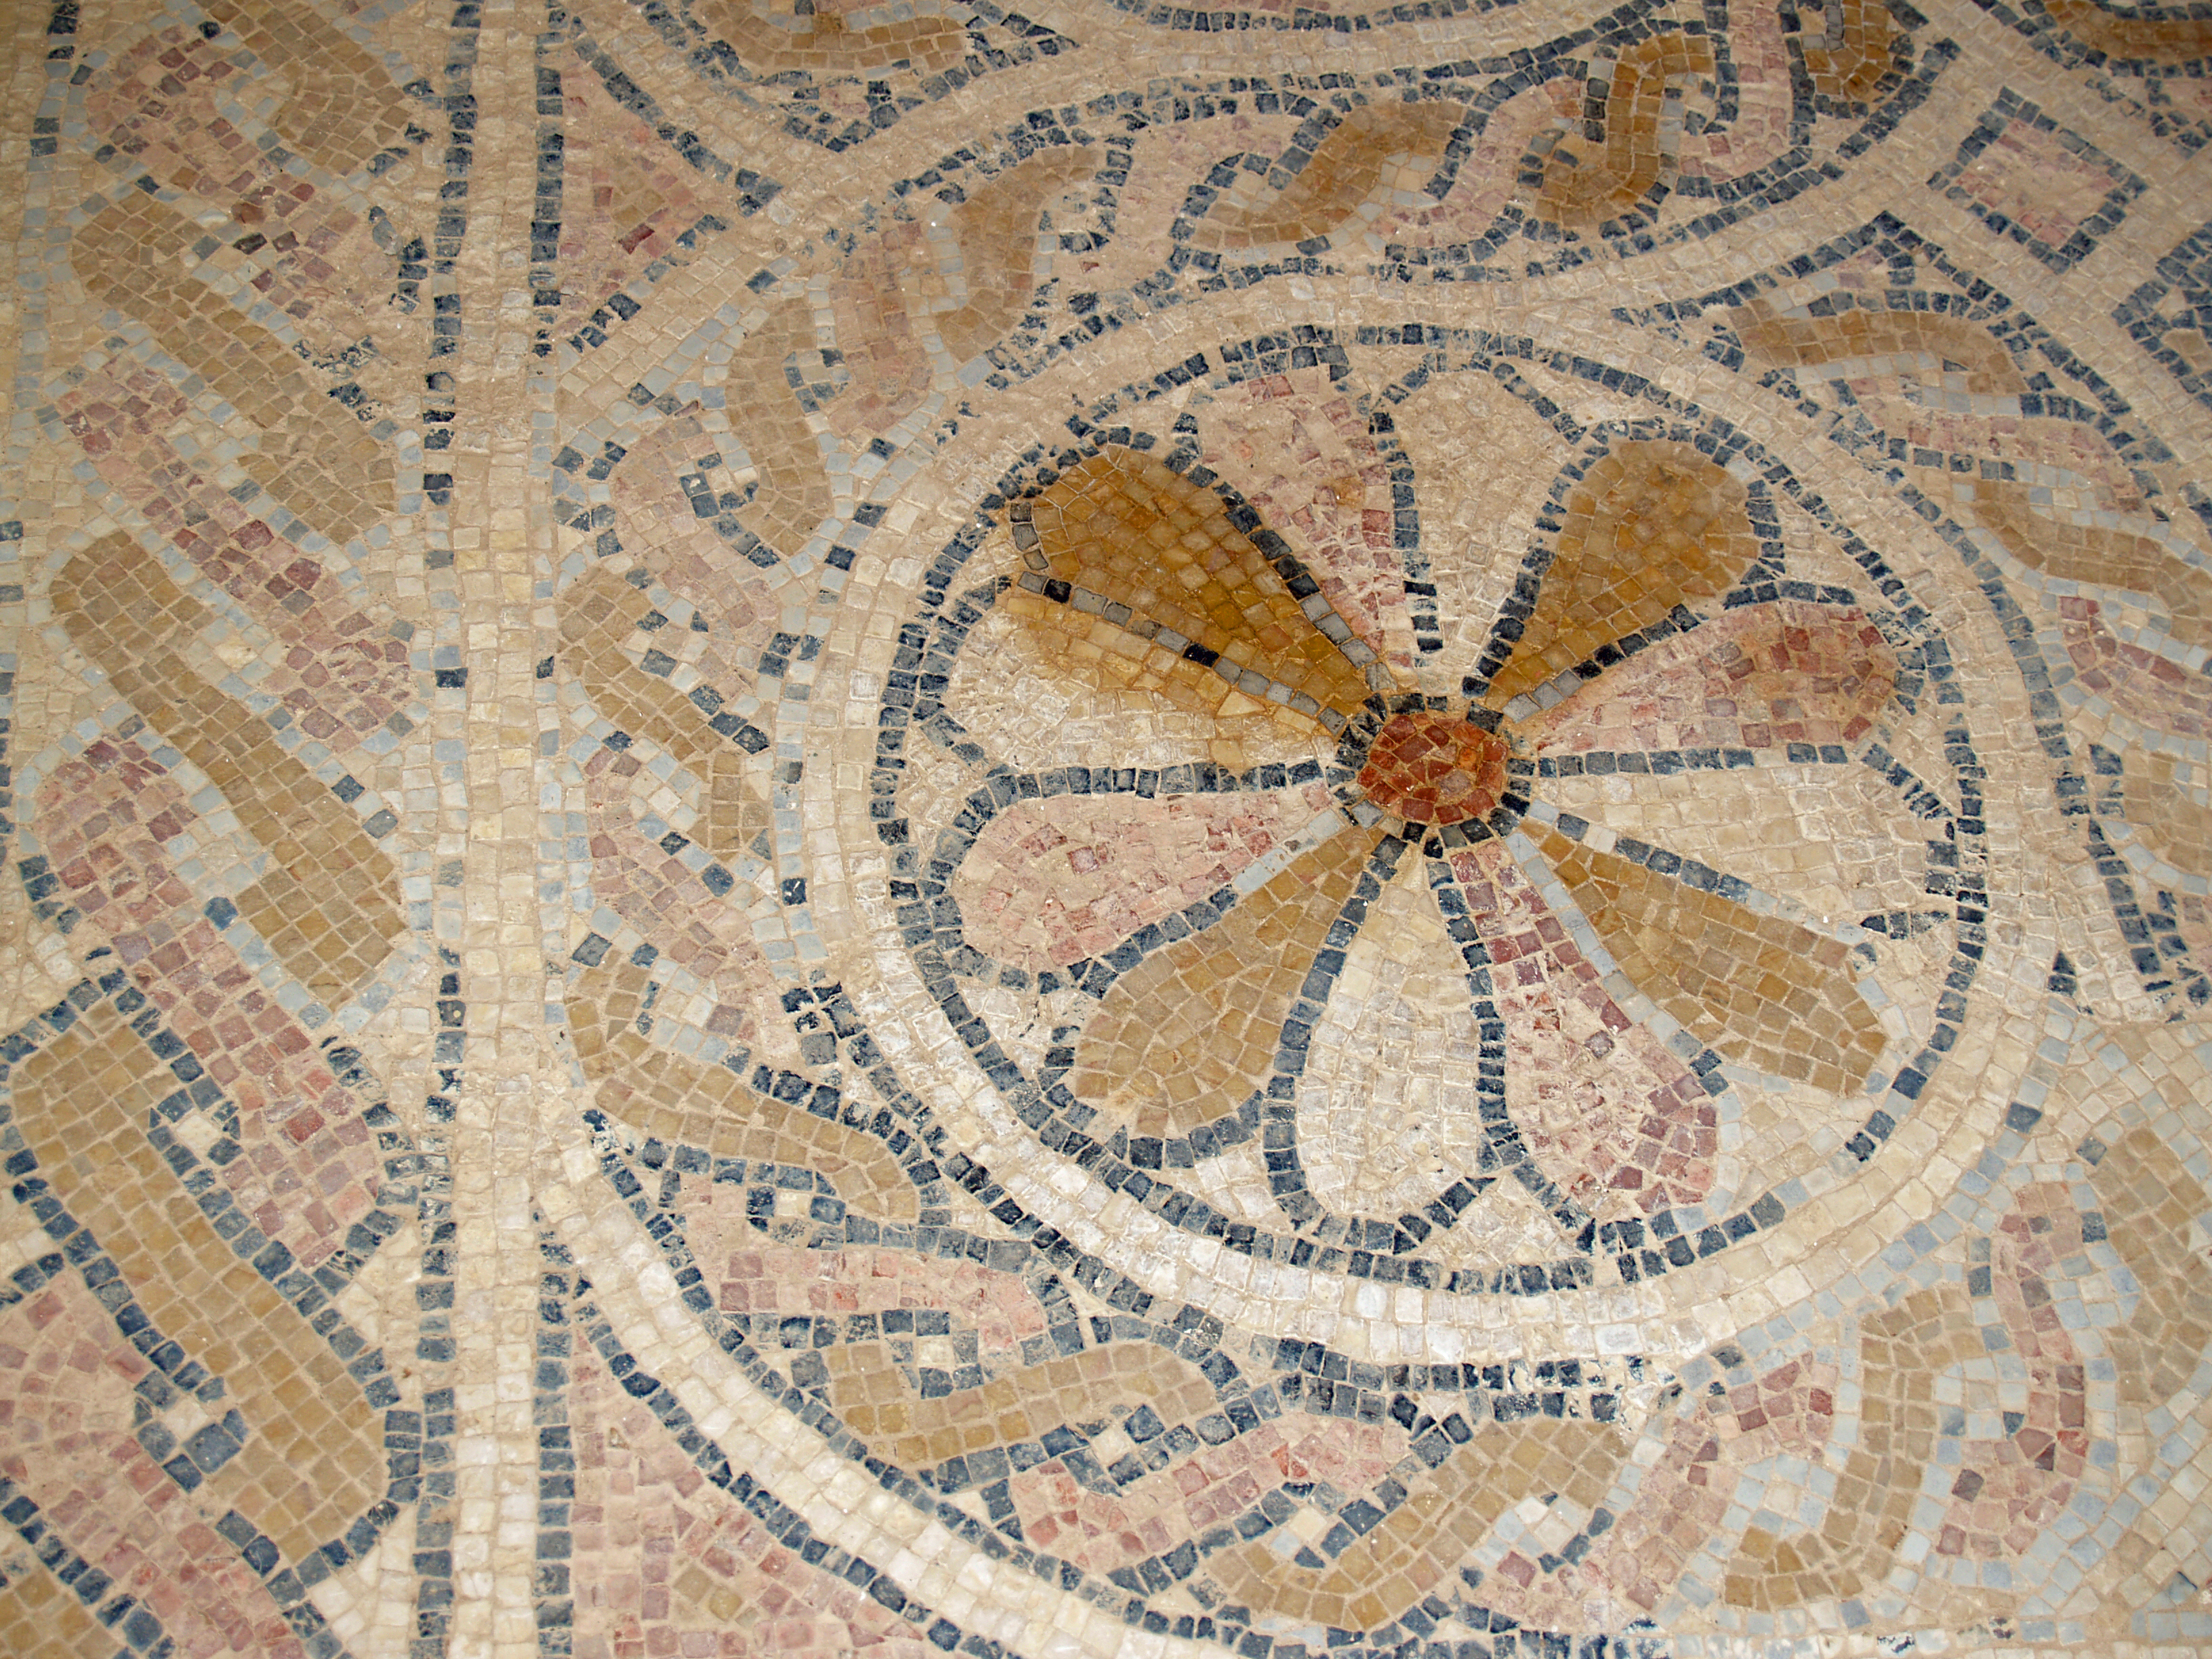 a tiled floor designed with many small square tiles